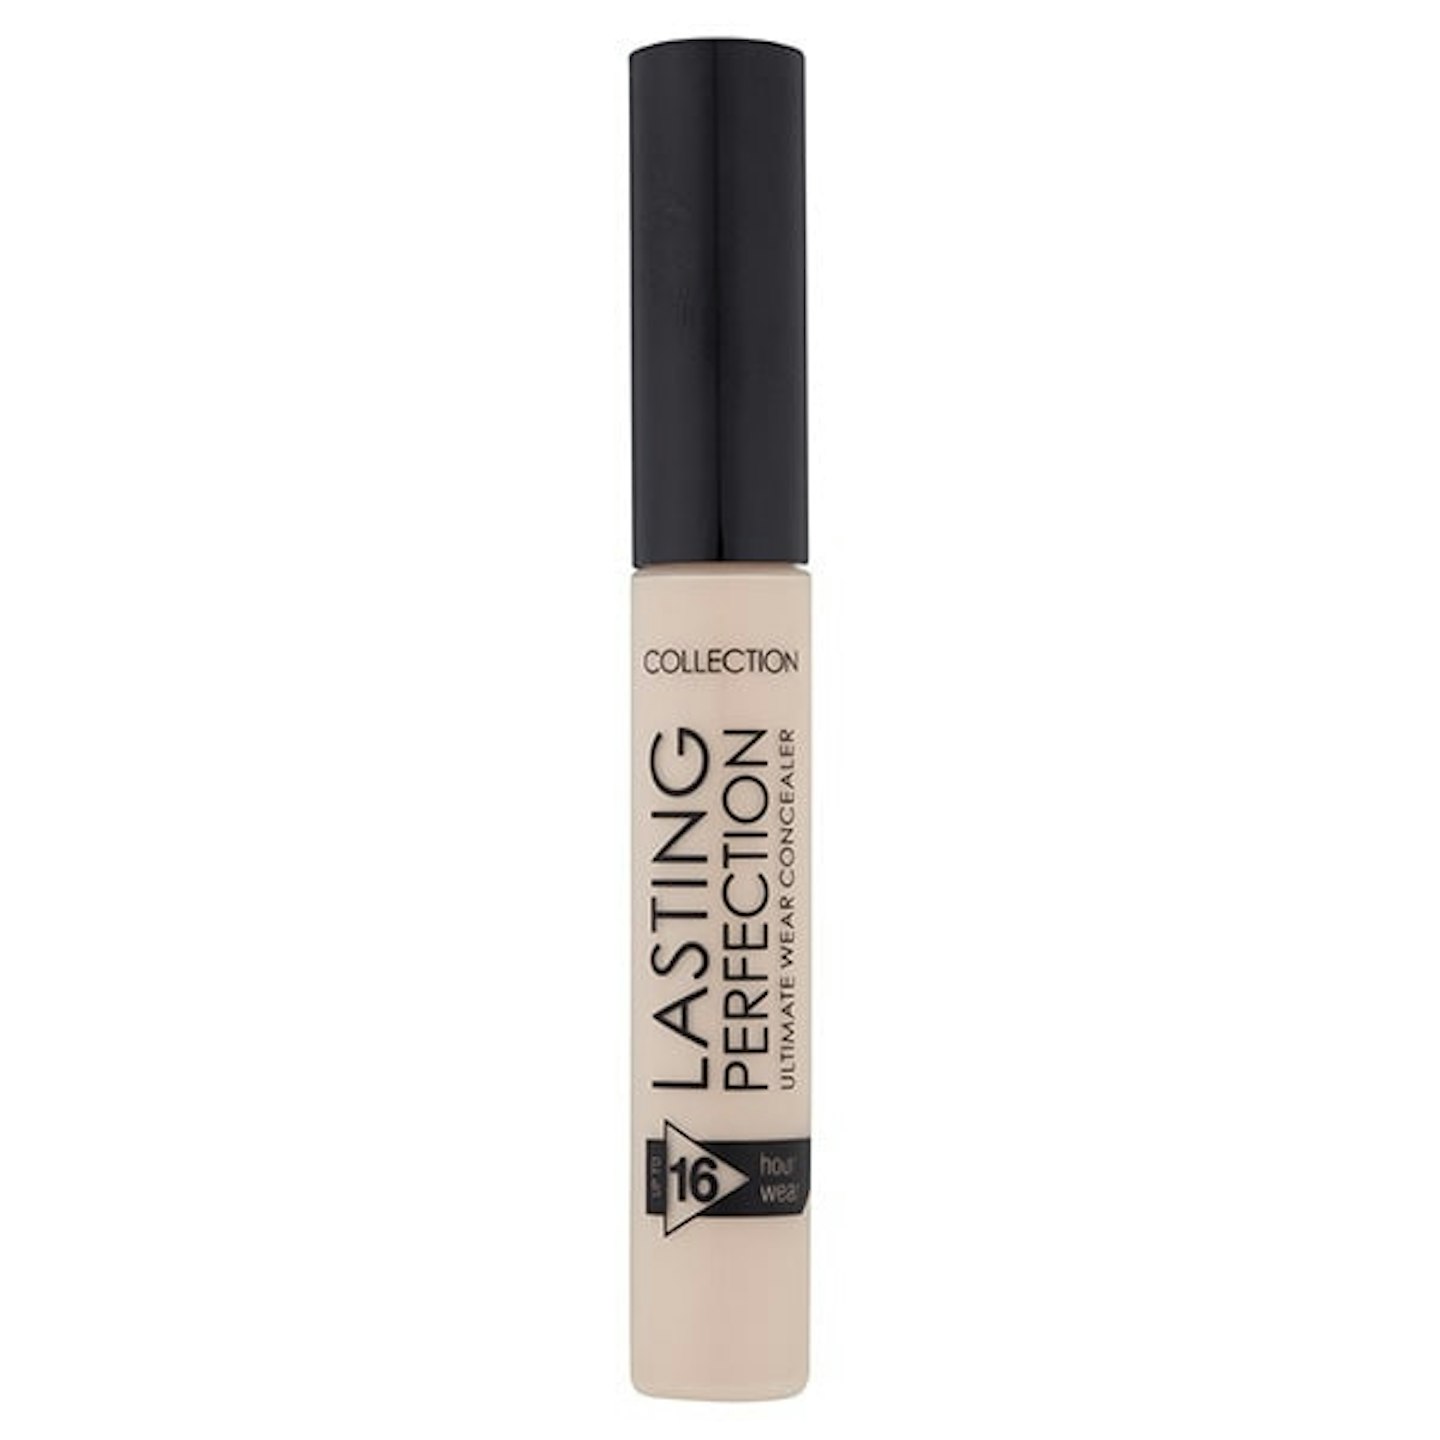 Lasting Perfection Concealer Correction, £4.19